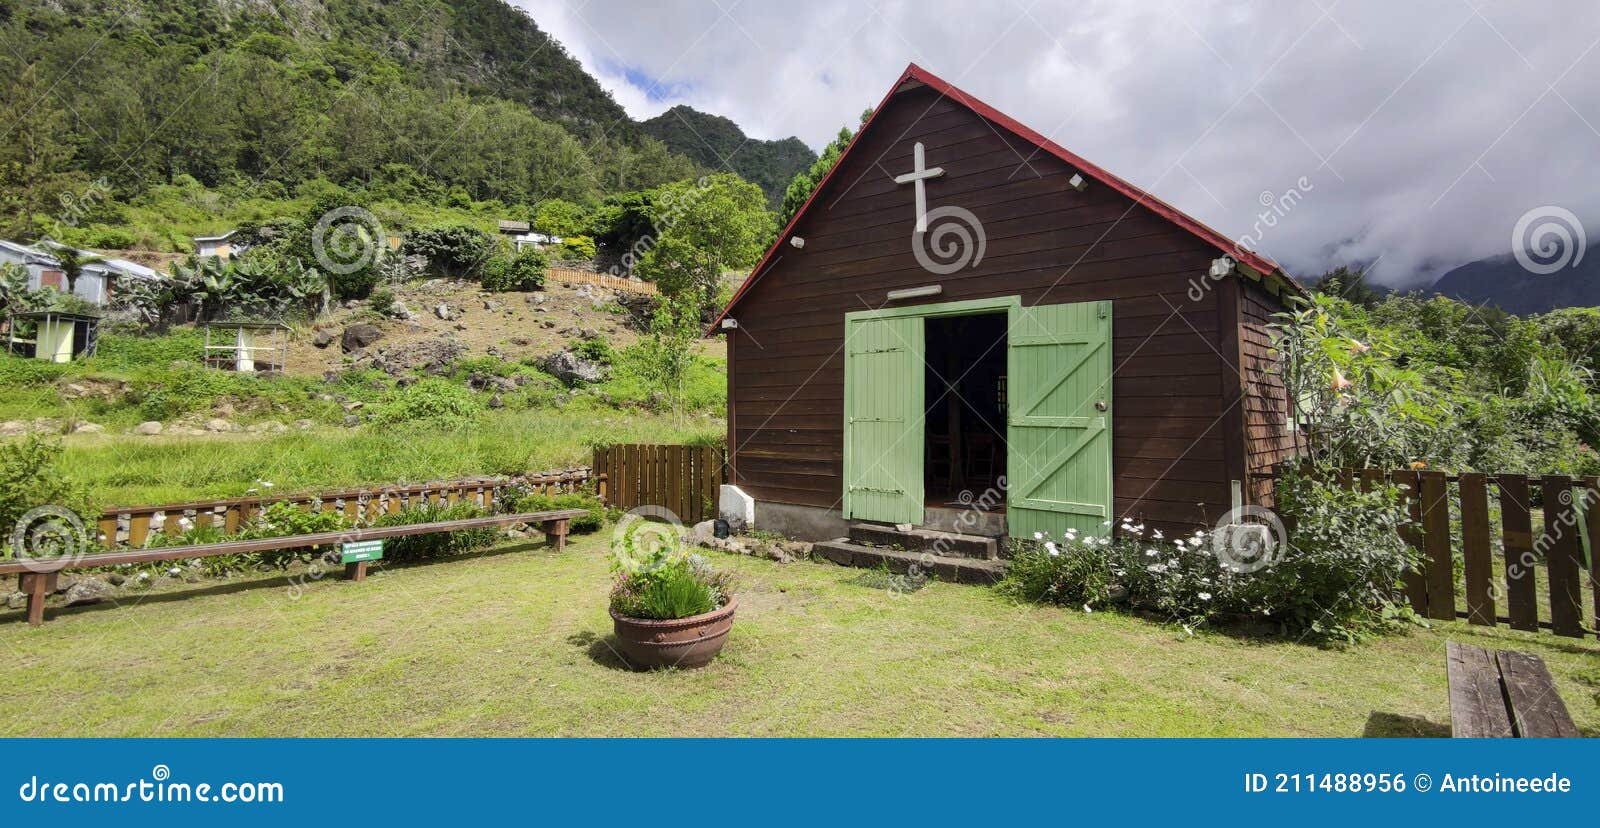 a small wooden church in the countryside of reunion island in the middle of mafate cirque, ile ÃÂ  malheur  village, france